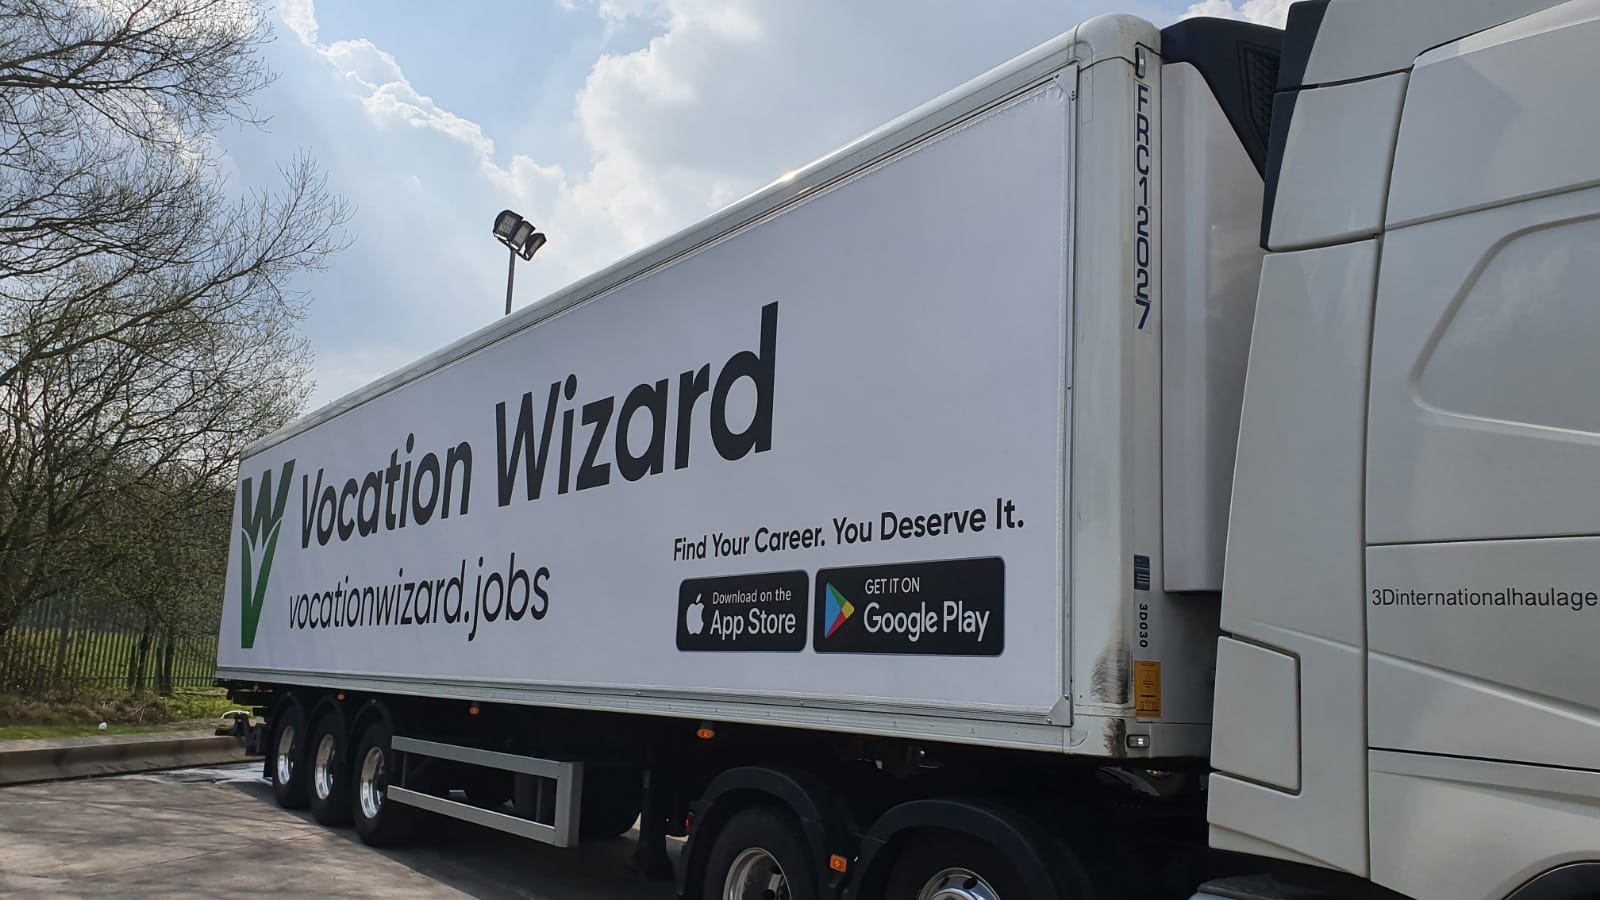 Vocation Wizard | Lorry graphics | Truck Wrap | Commercial truck and lorry signage